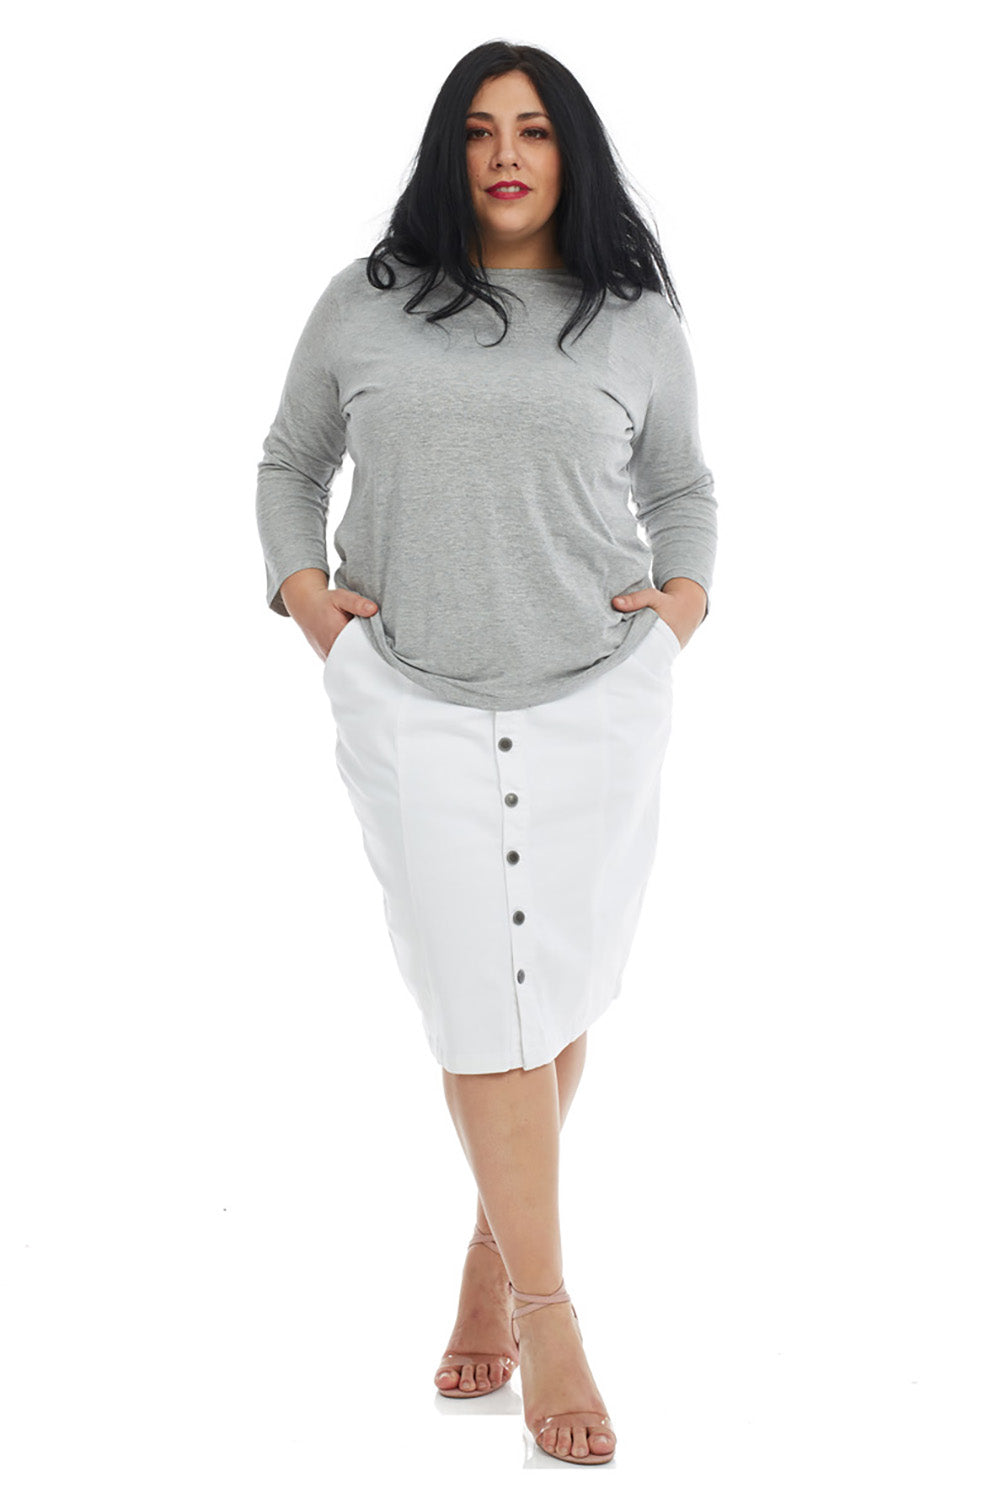 white below the knee plus size button down modest denim jean pencil skirt with pockets and belt loops